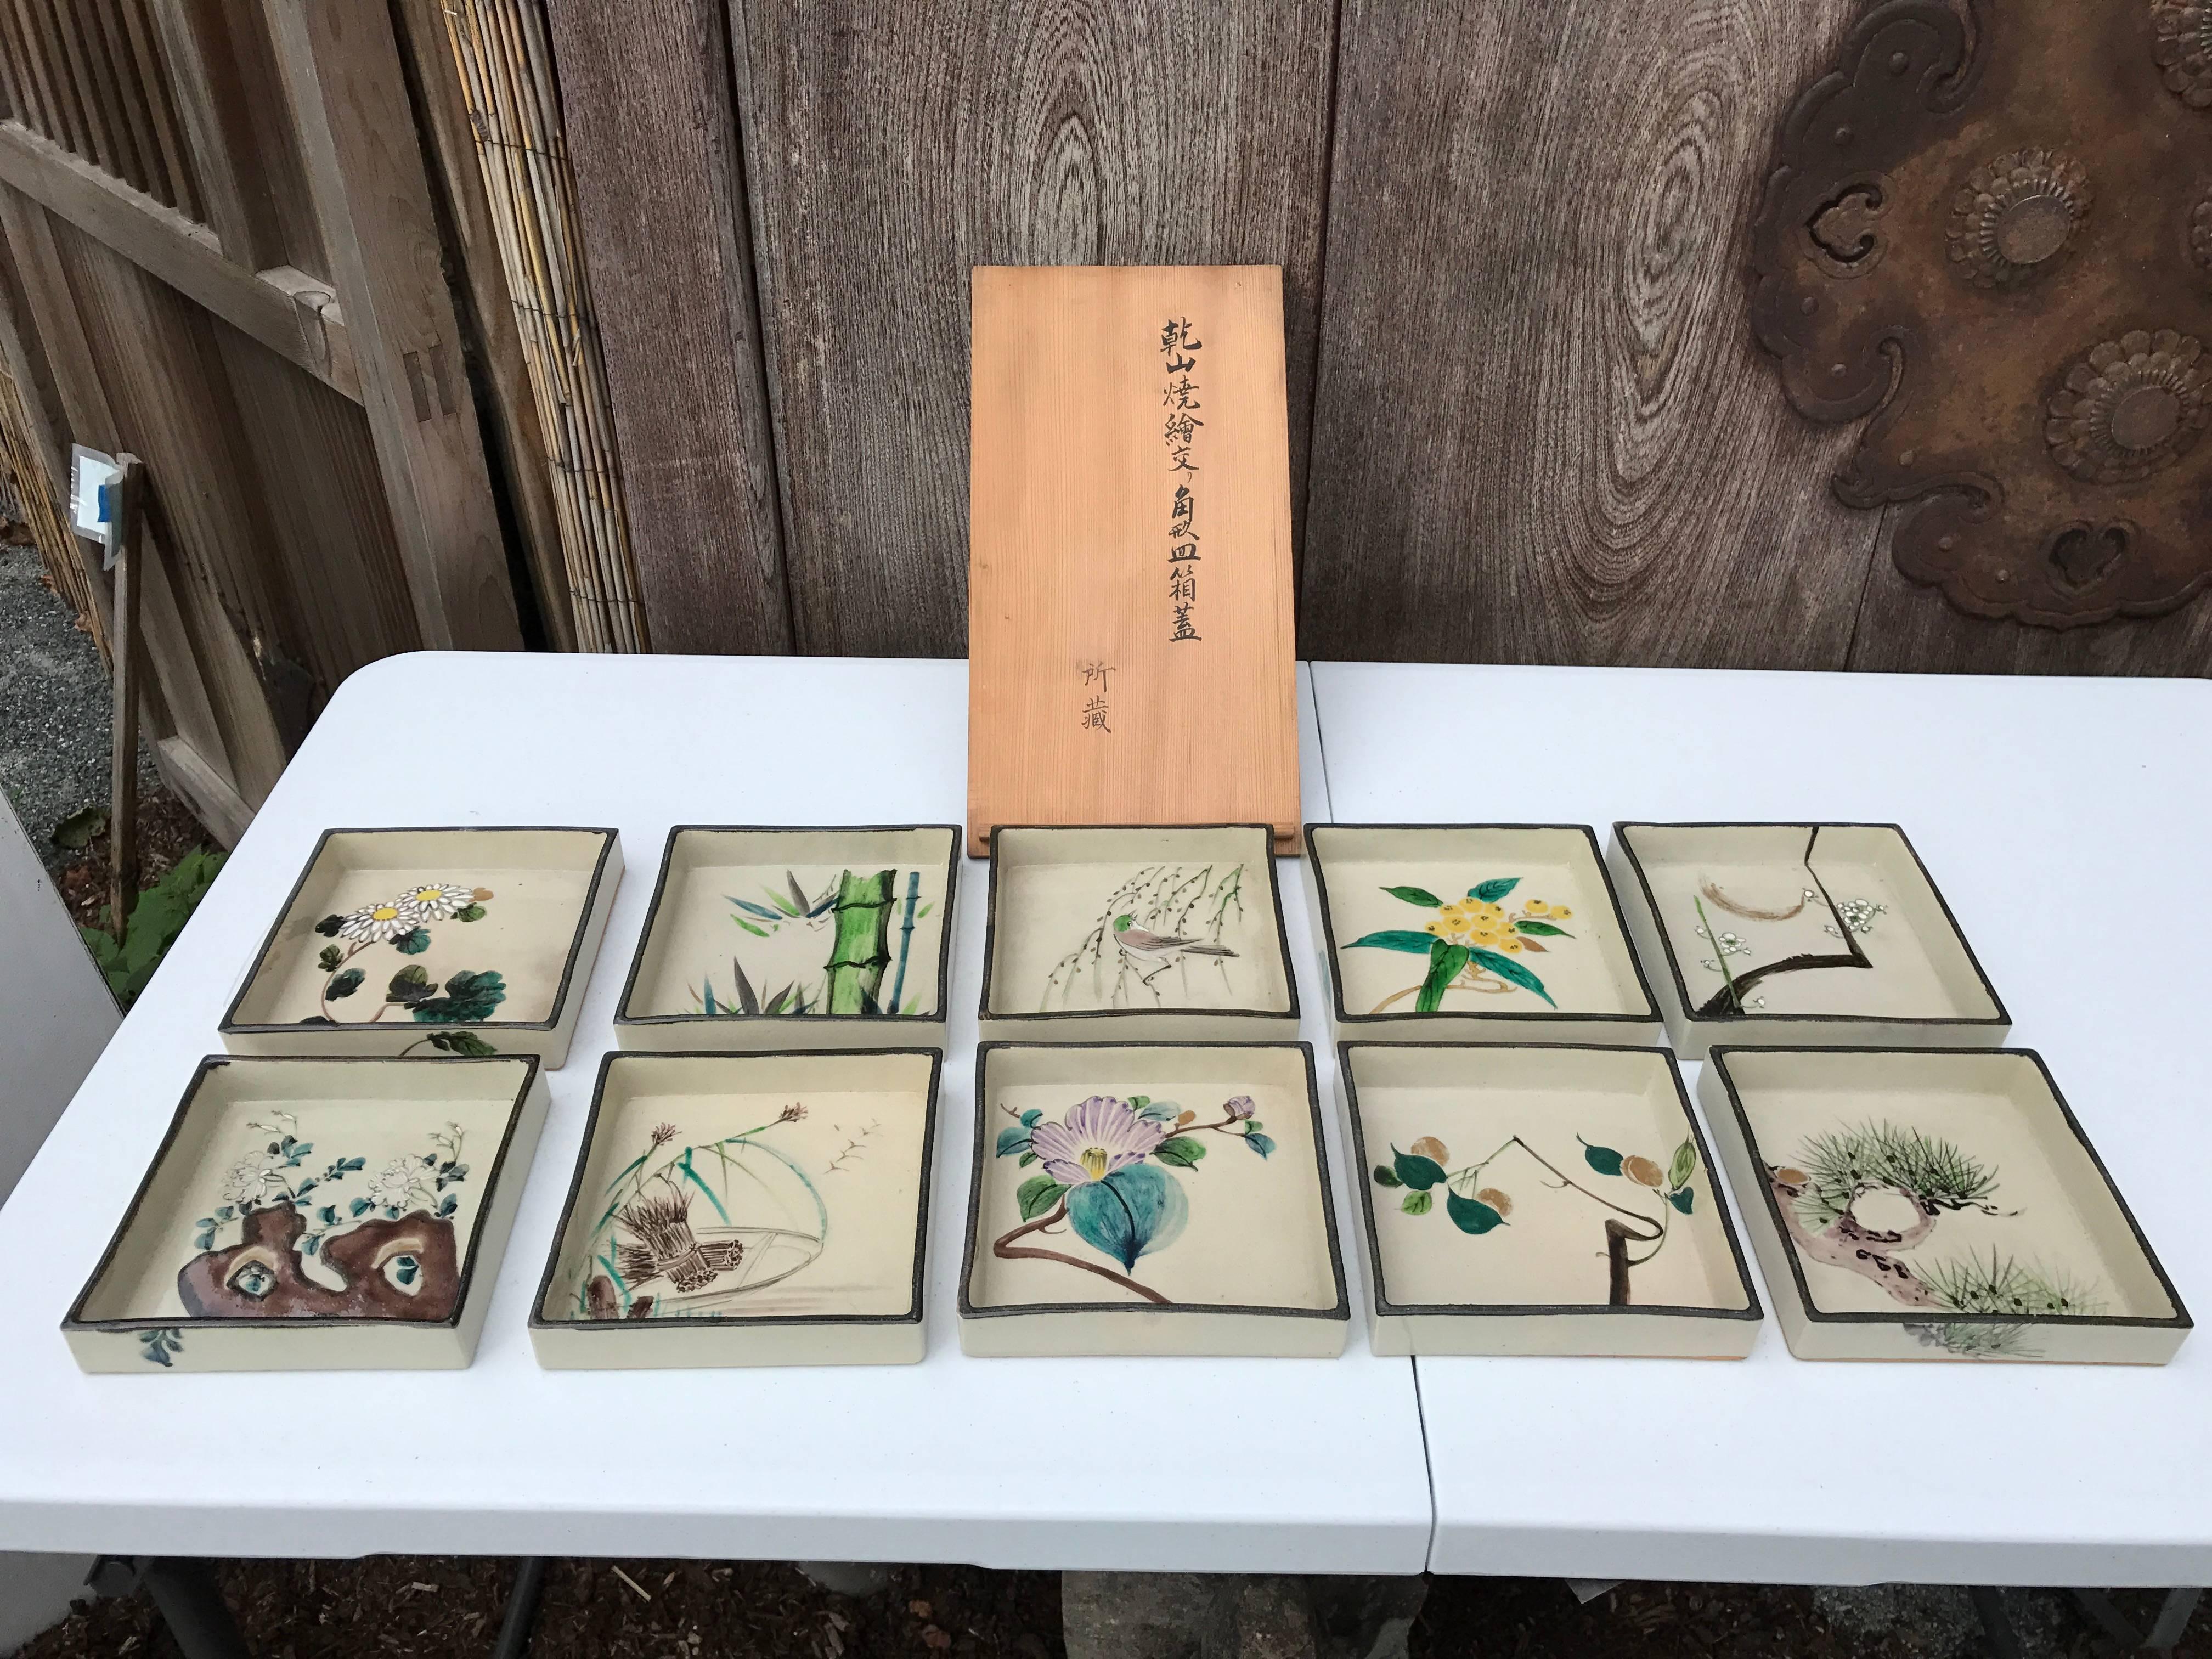 Mint, signed and boxed

A wonderful Japanese antique collection of ten (10) attractive hand-painted ceramic botanical and bird square shaped low bowls Kakuzara or ceramic plates dating to the Mid-20th century, Taisho period, probably an Arita kiln.